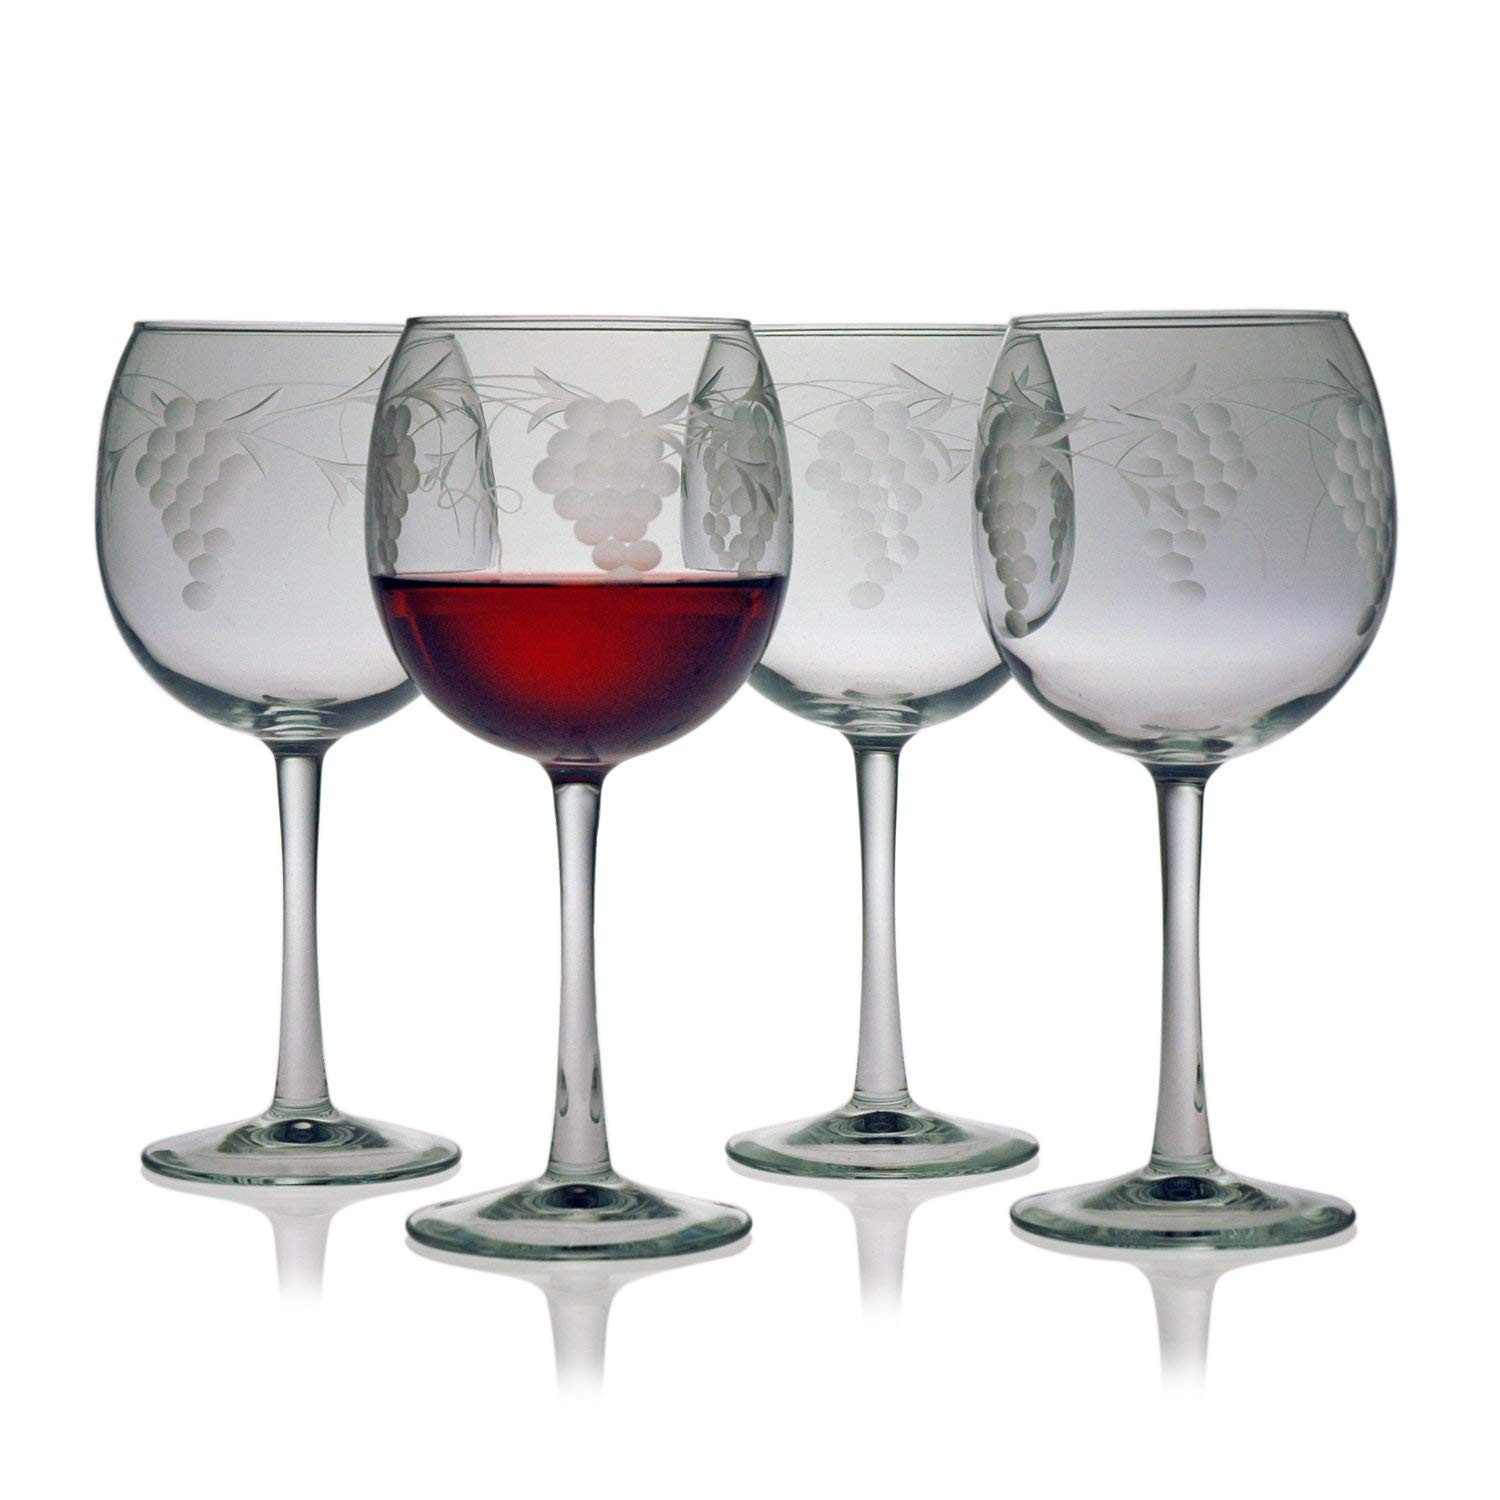 13 Cute Lenox Clear Glass Vase 2024 free download lenox clear glass vase of amazon com susquehanna glass sonoma grape pattern cut glass intended for amazon com susquehanna glass sonoma grape pattern cut glass balloon wine glasses set of 4 1